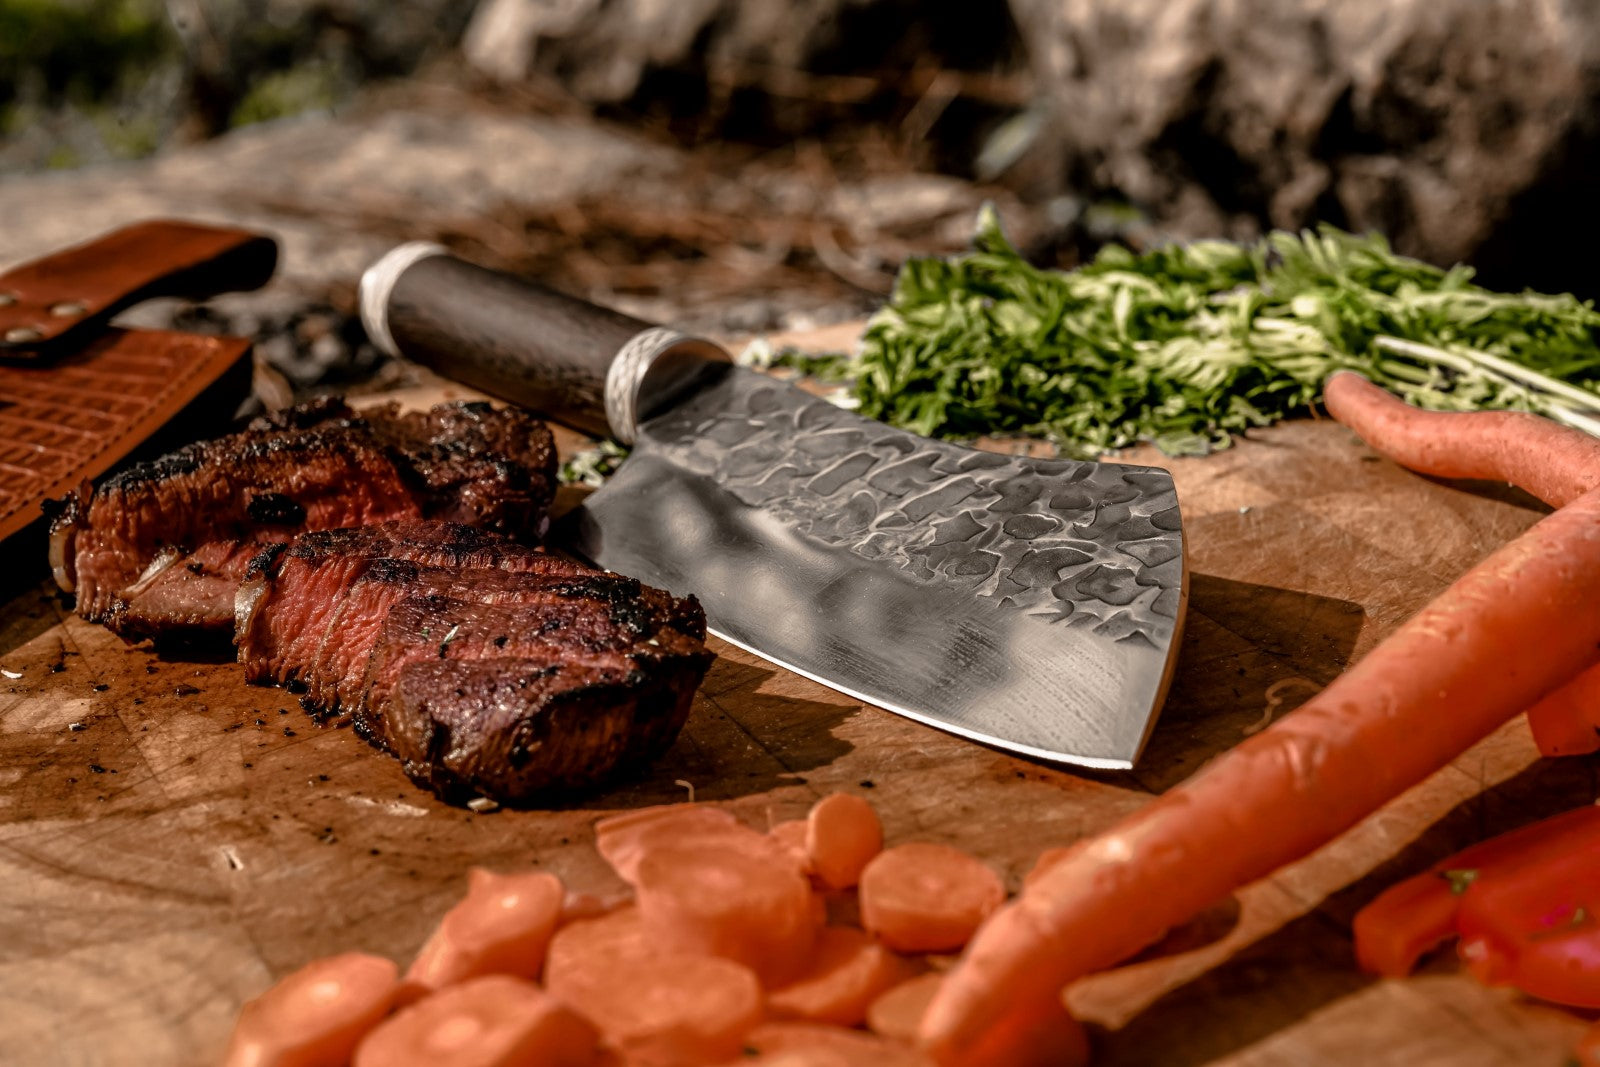 Viking Kitchen Knife | Viking Knife with Sheath | Meat Cleaver Knife | Viking Hand-Forged Premium Stainless Steel Chef's Knife | Medieval Butcher Knif